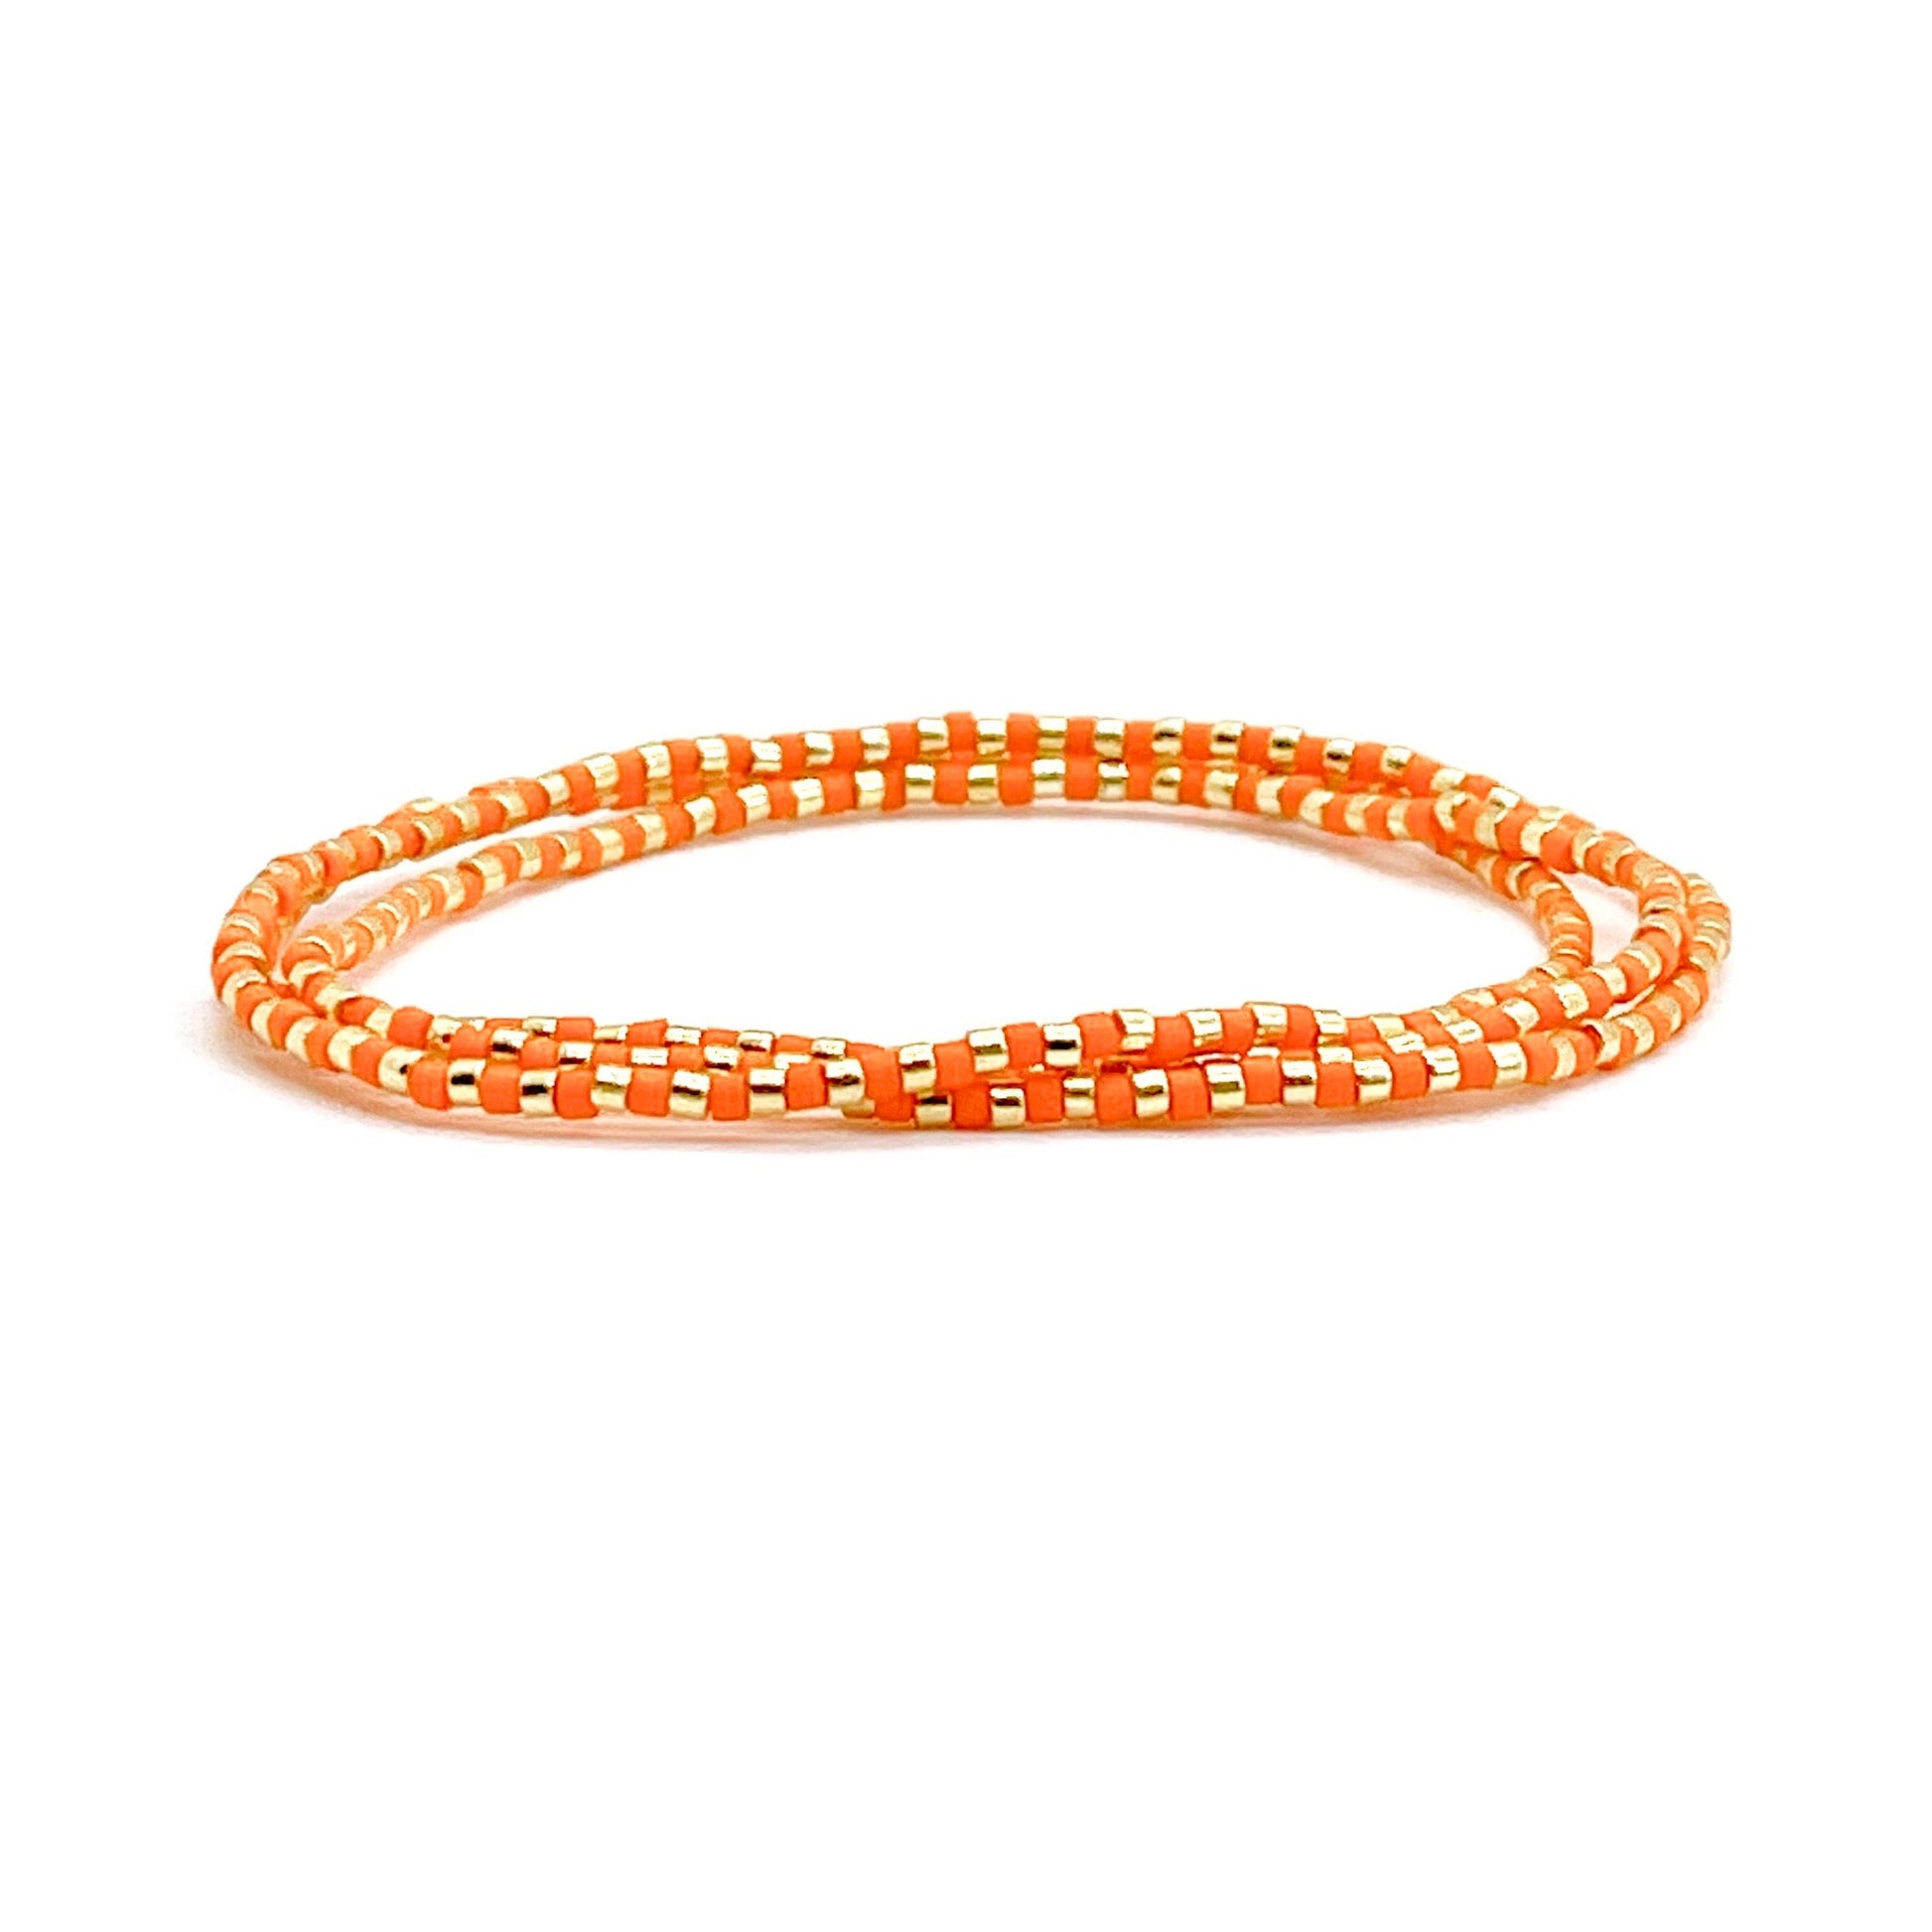 Wrap bracelet with small orange and gold-tone glass seed beads on stretch cord.